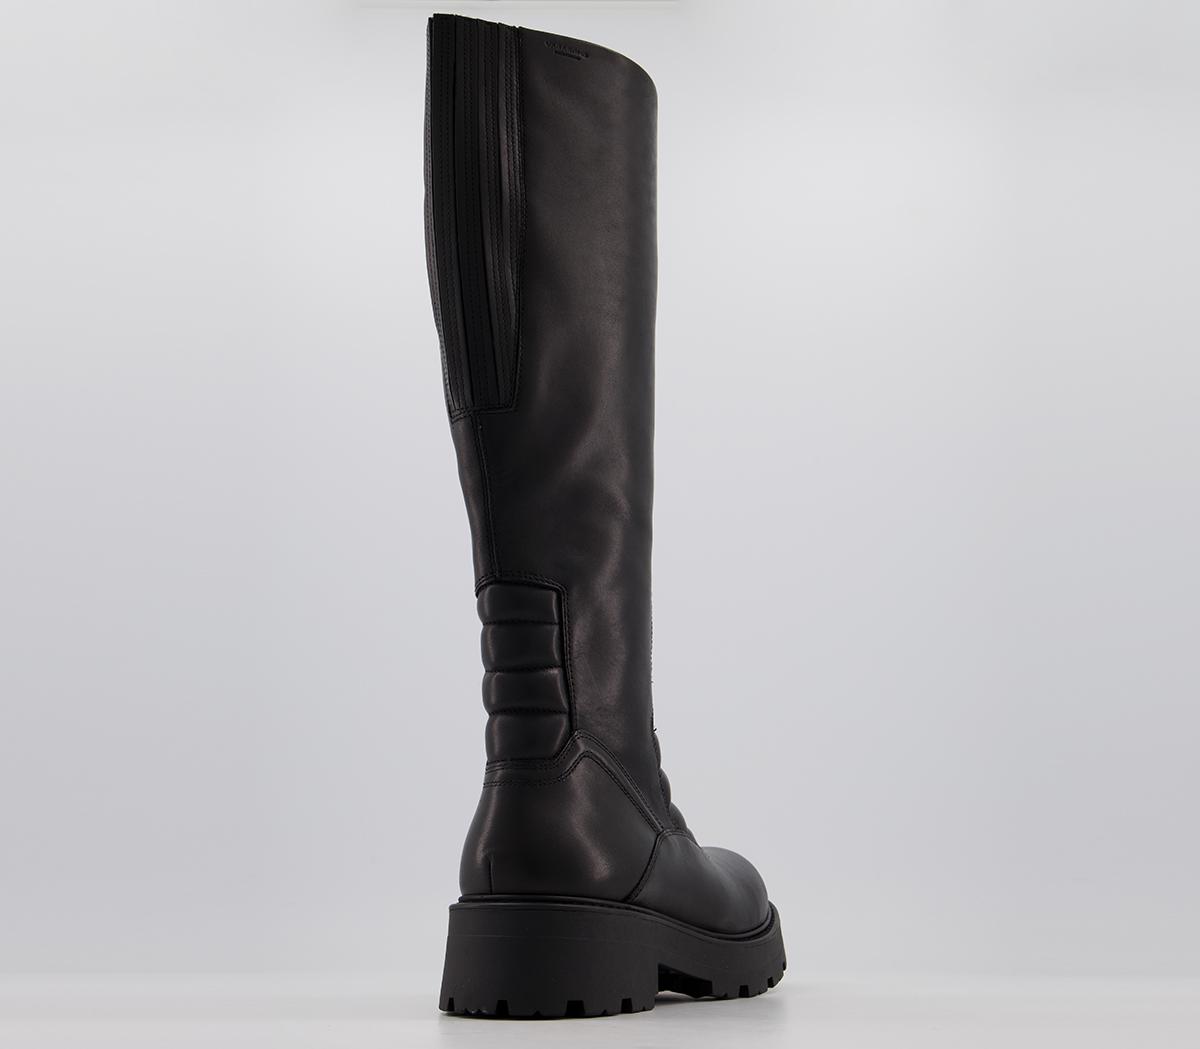 Vagabond Shoemakers Cosmo 2.0 Tall Biker Boots Black - Knee High Boots